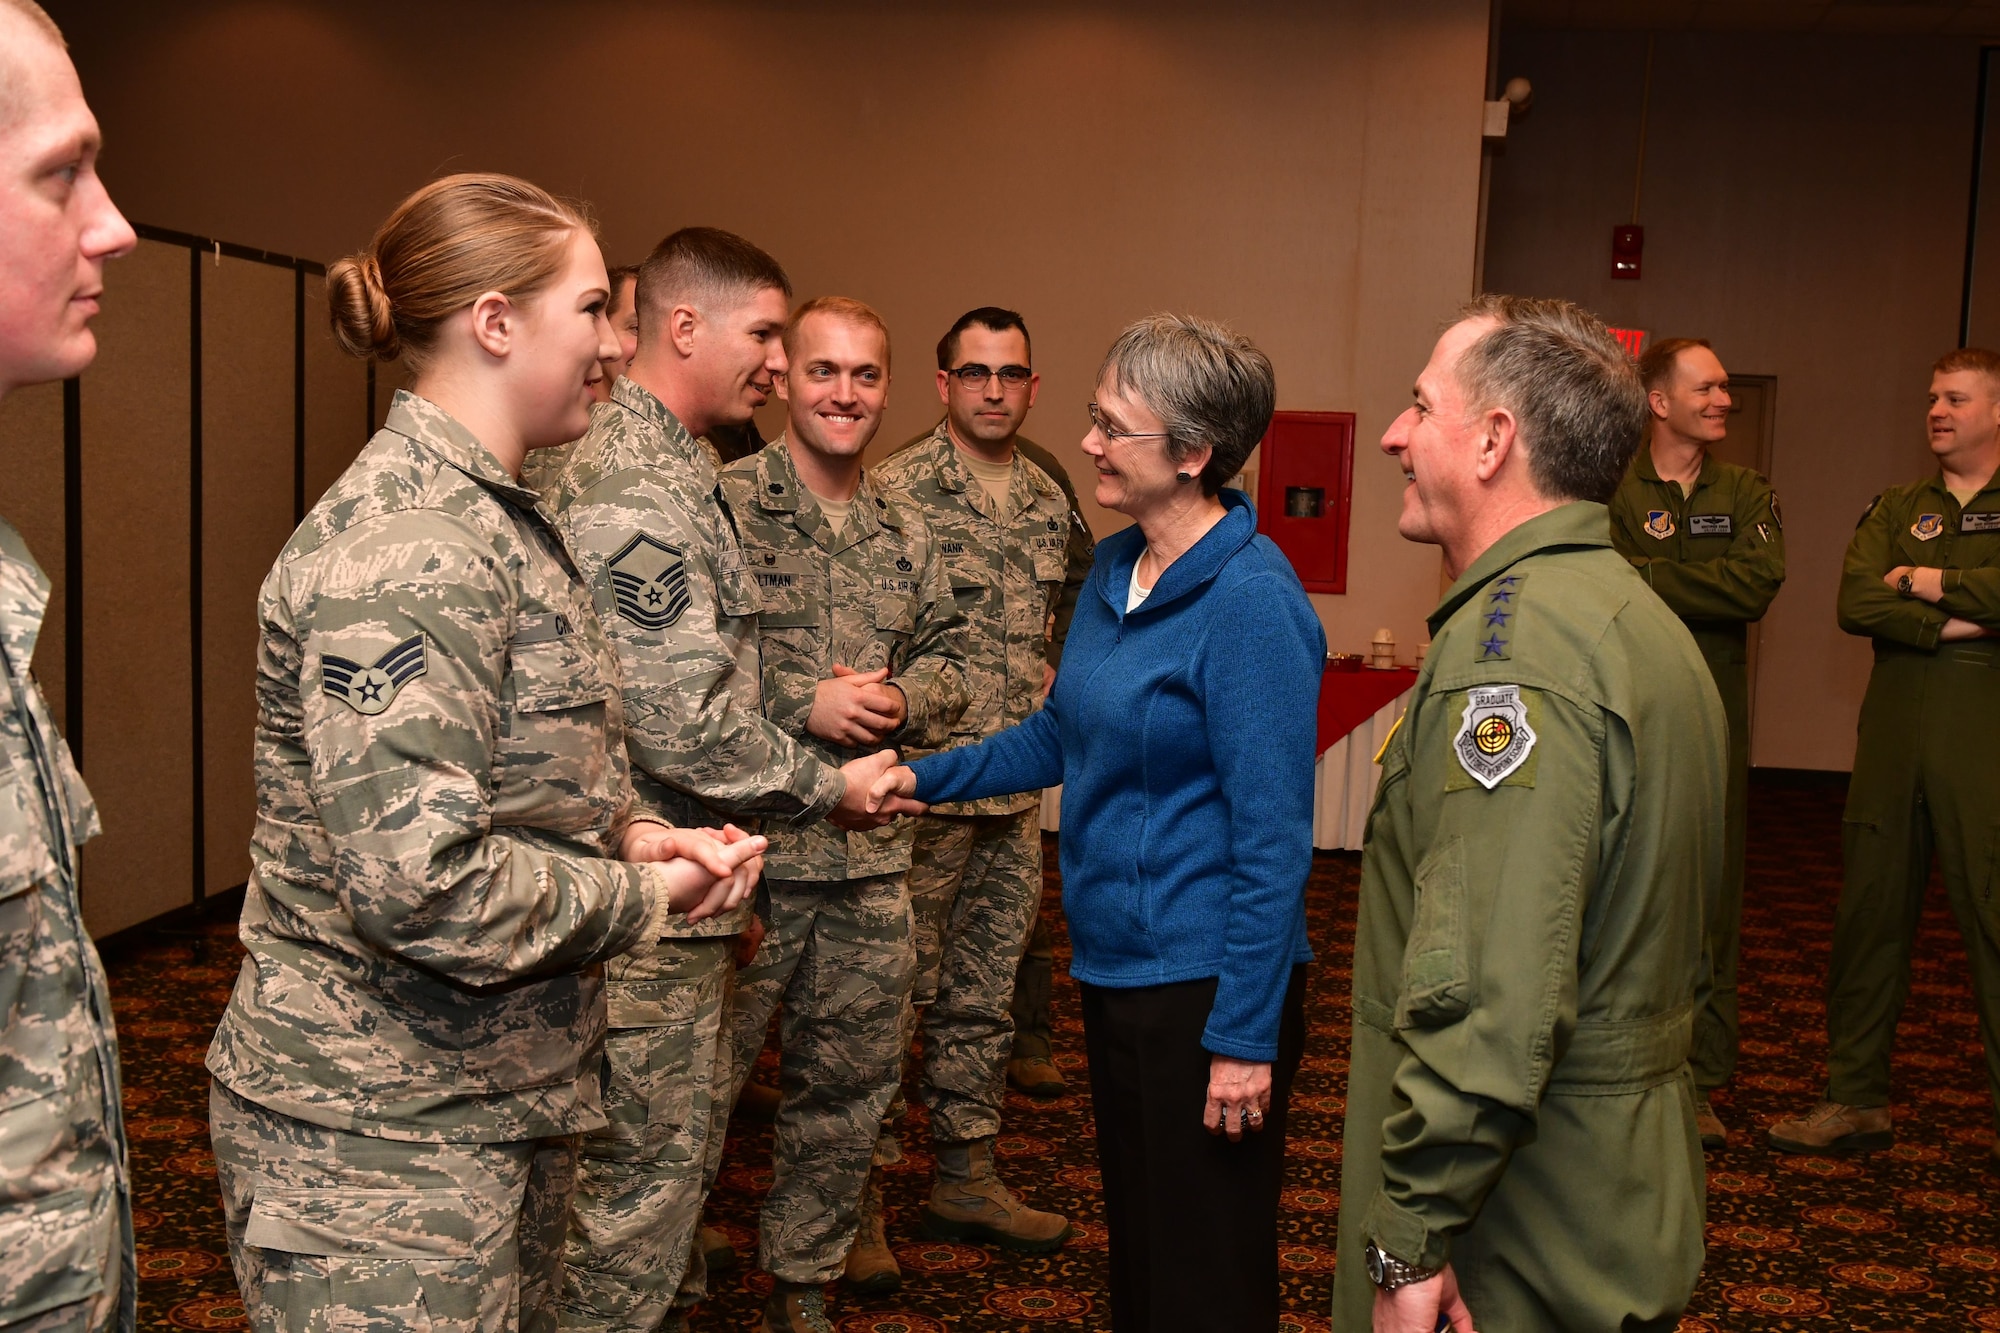 Secretary of the Air Force Heather Wilson and Air Force Chief of Staff Gen. David L. Goldfein shake hands with Airmen from the 8th Fighter Wing at Osan Air Base, Republic of Korea, January 29, 2018. Members of the Wolf Pack were recognized as superior performers by Wilson and Goldfein and briefed the senior leaders on the specific mission sets in their respective fields. (U.S. Air Force photo by Staff Sgt. Franklin R. Ramos)